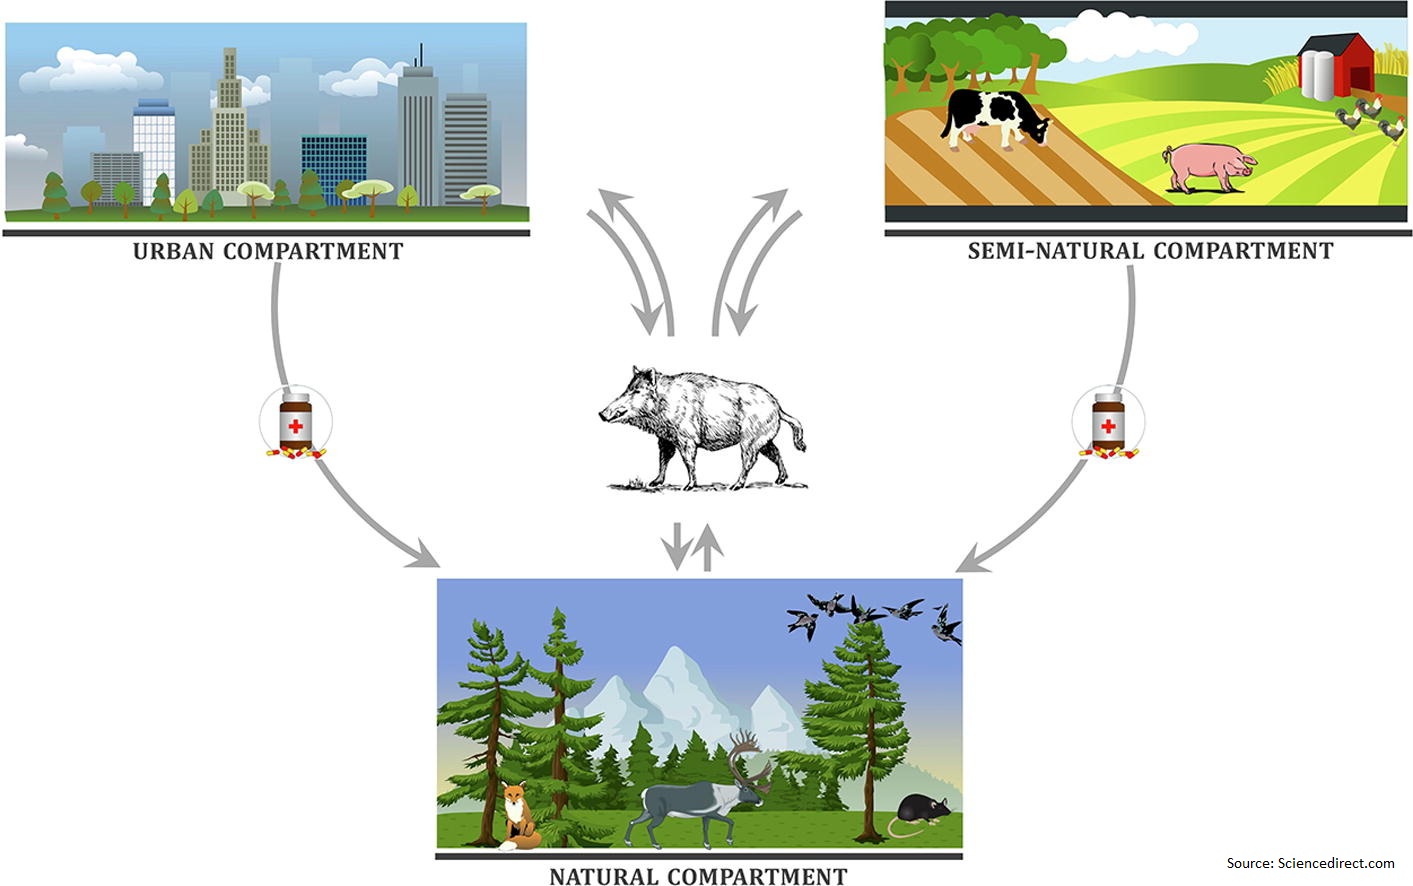 Wild boar as a reservoir of antimicrobial resistance